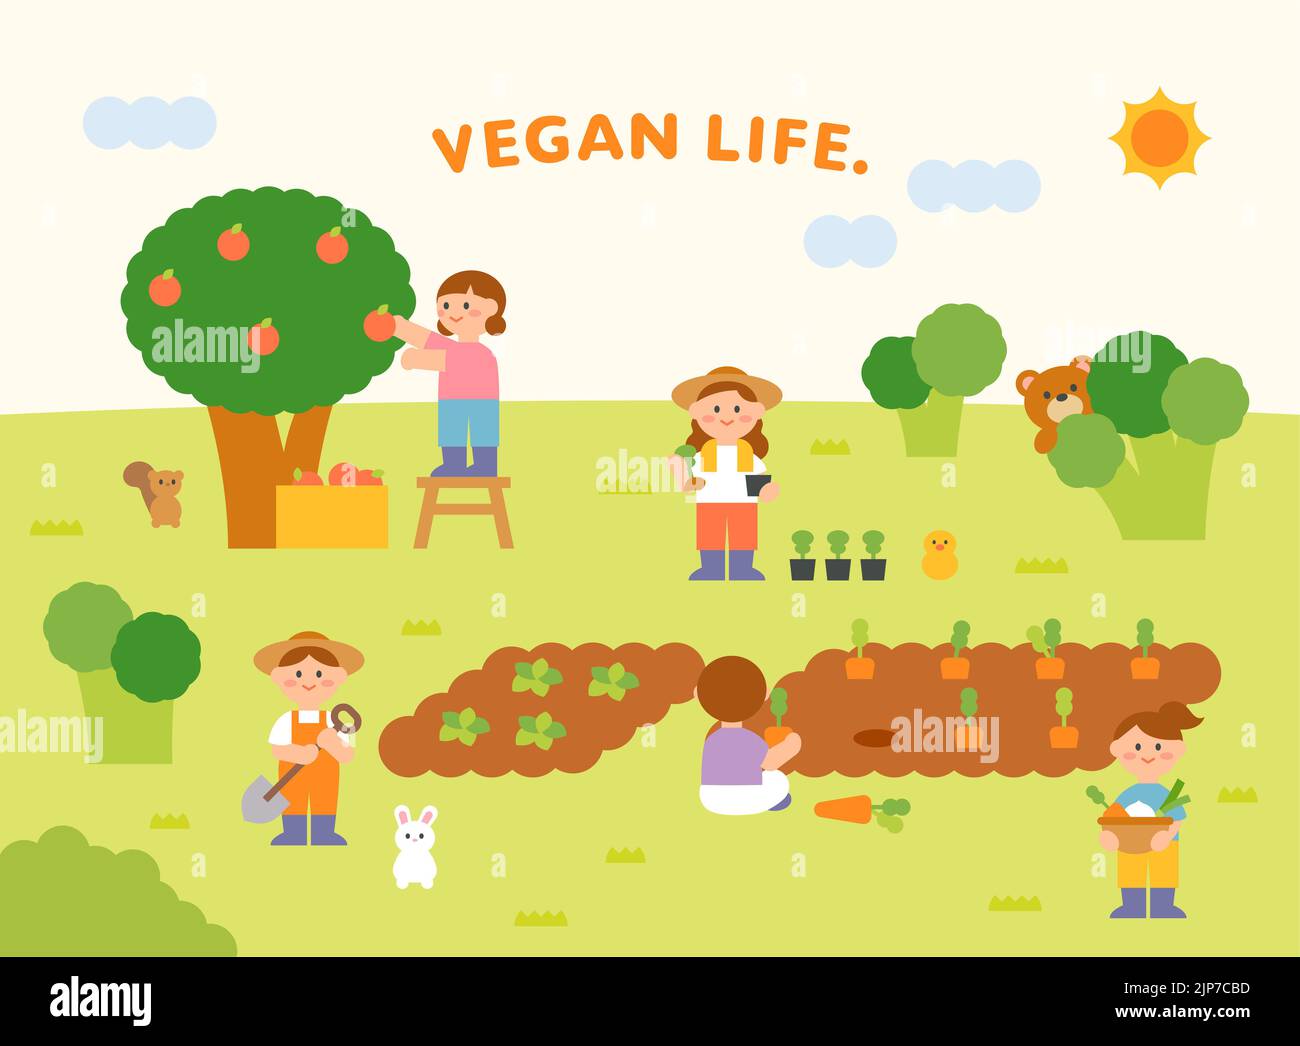 Vegan life. Cute characters are growing vegetables on the farm. A person picking fruit from a tree. The bear hiding behind the broccoli. flat design s Stock Photo